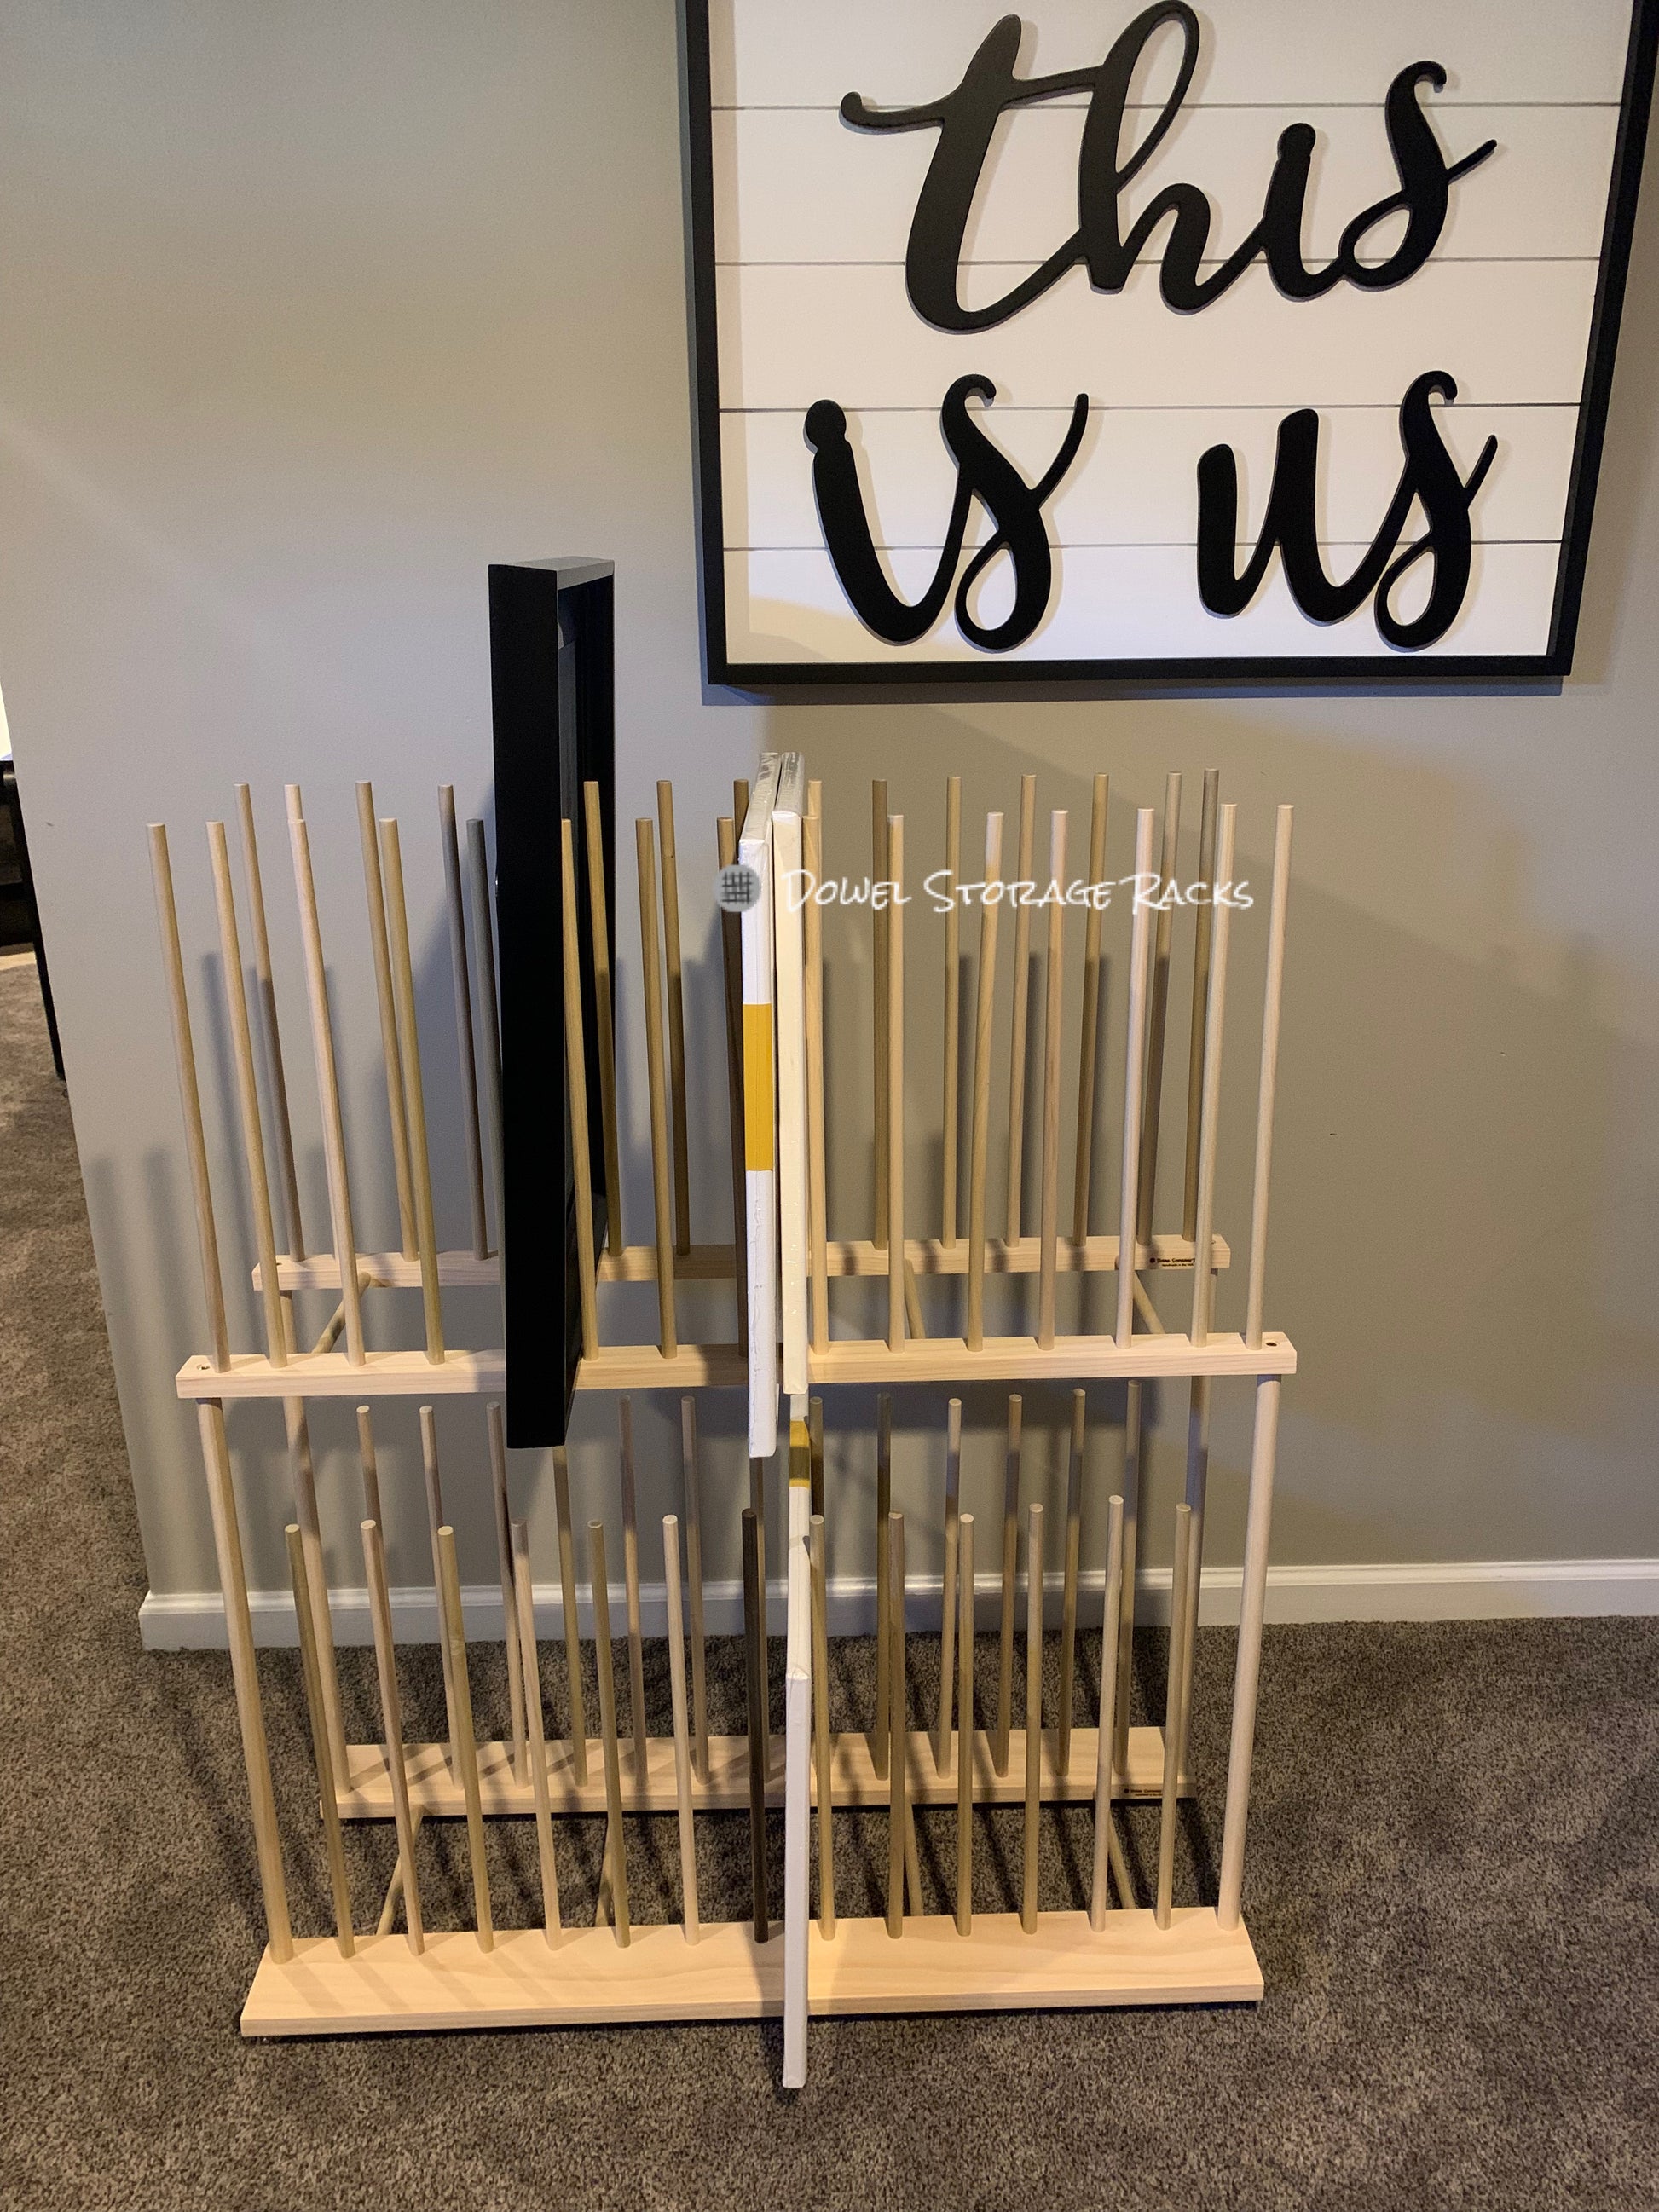 Two Tier Wheeled Art Storage Rack With 18 Tall Dowels 24 Long